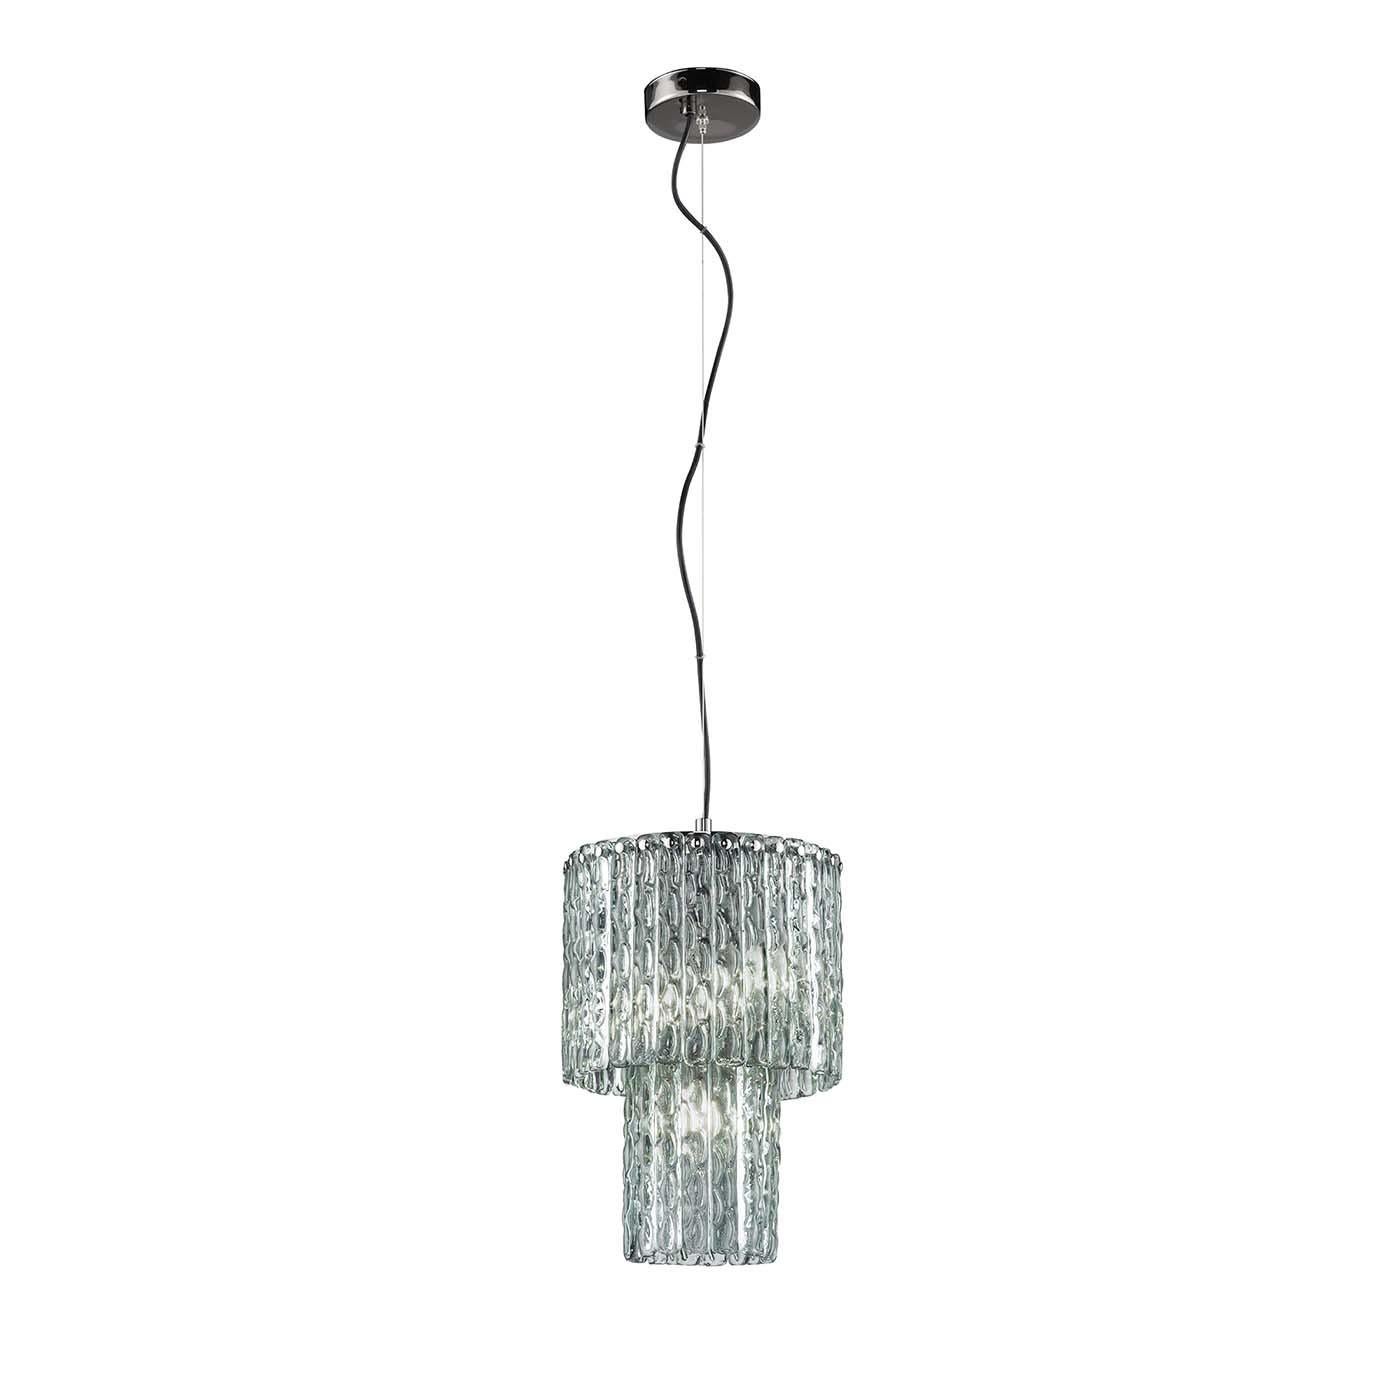 This elegant and stylish midcentury style chandelier is part of the Cascade Collection and features a round chrome-plated frame with two tiers of cascading rectangular pendants in hammered glass with an iridescent viridian color. Entirely